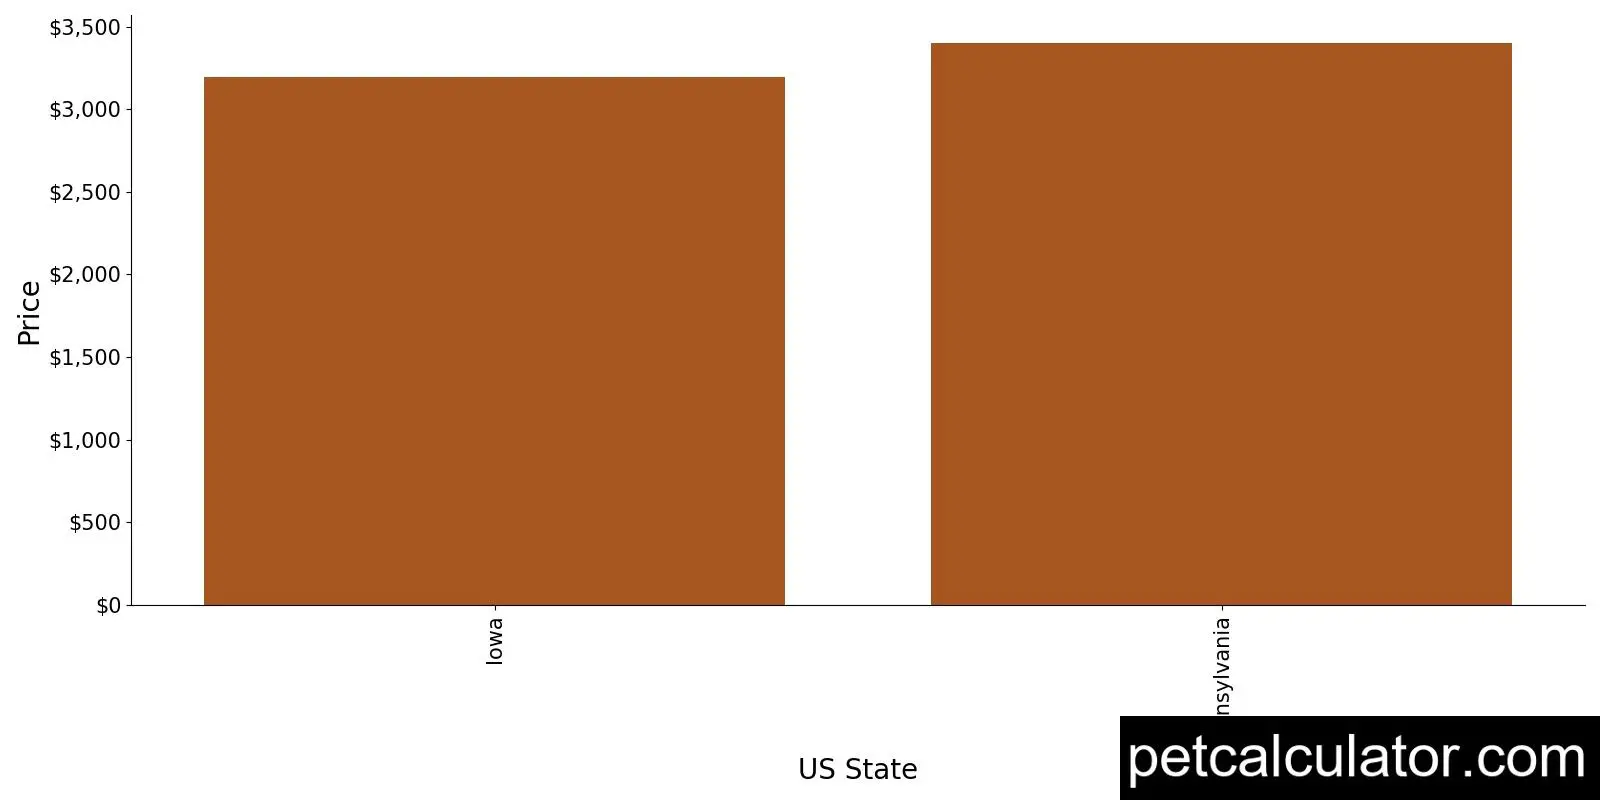 Price of Bernese Water Dog by US State 